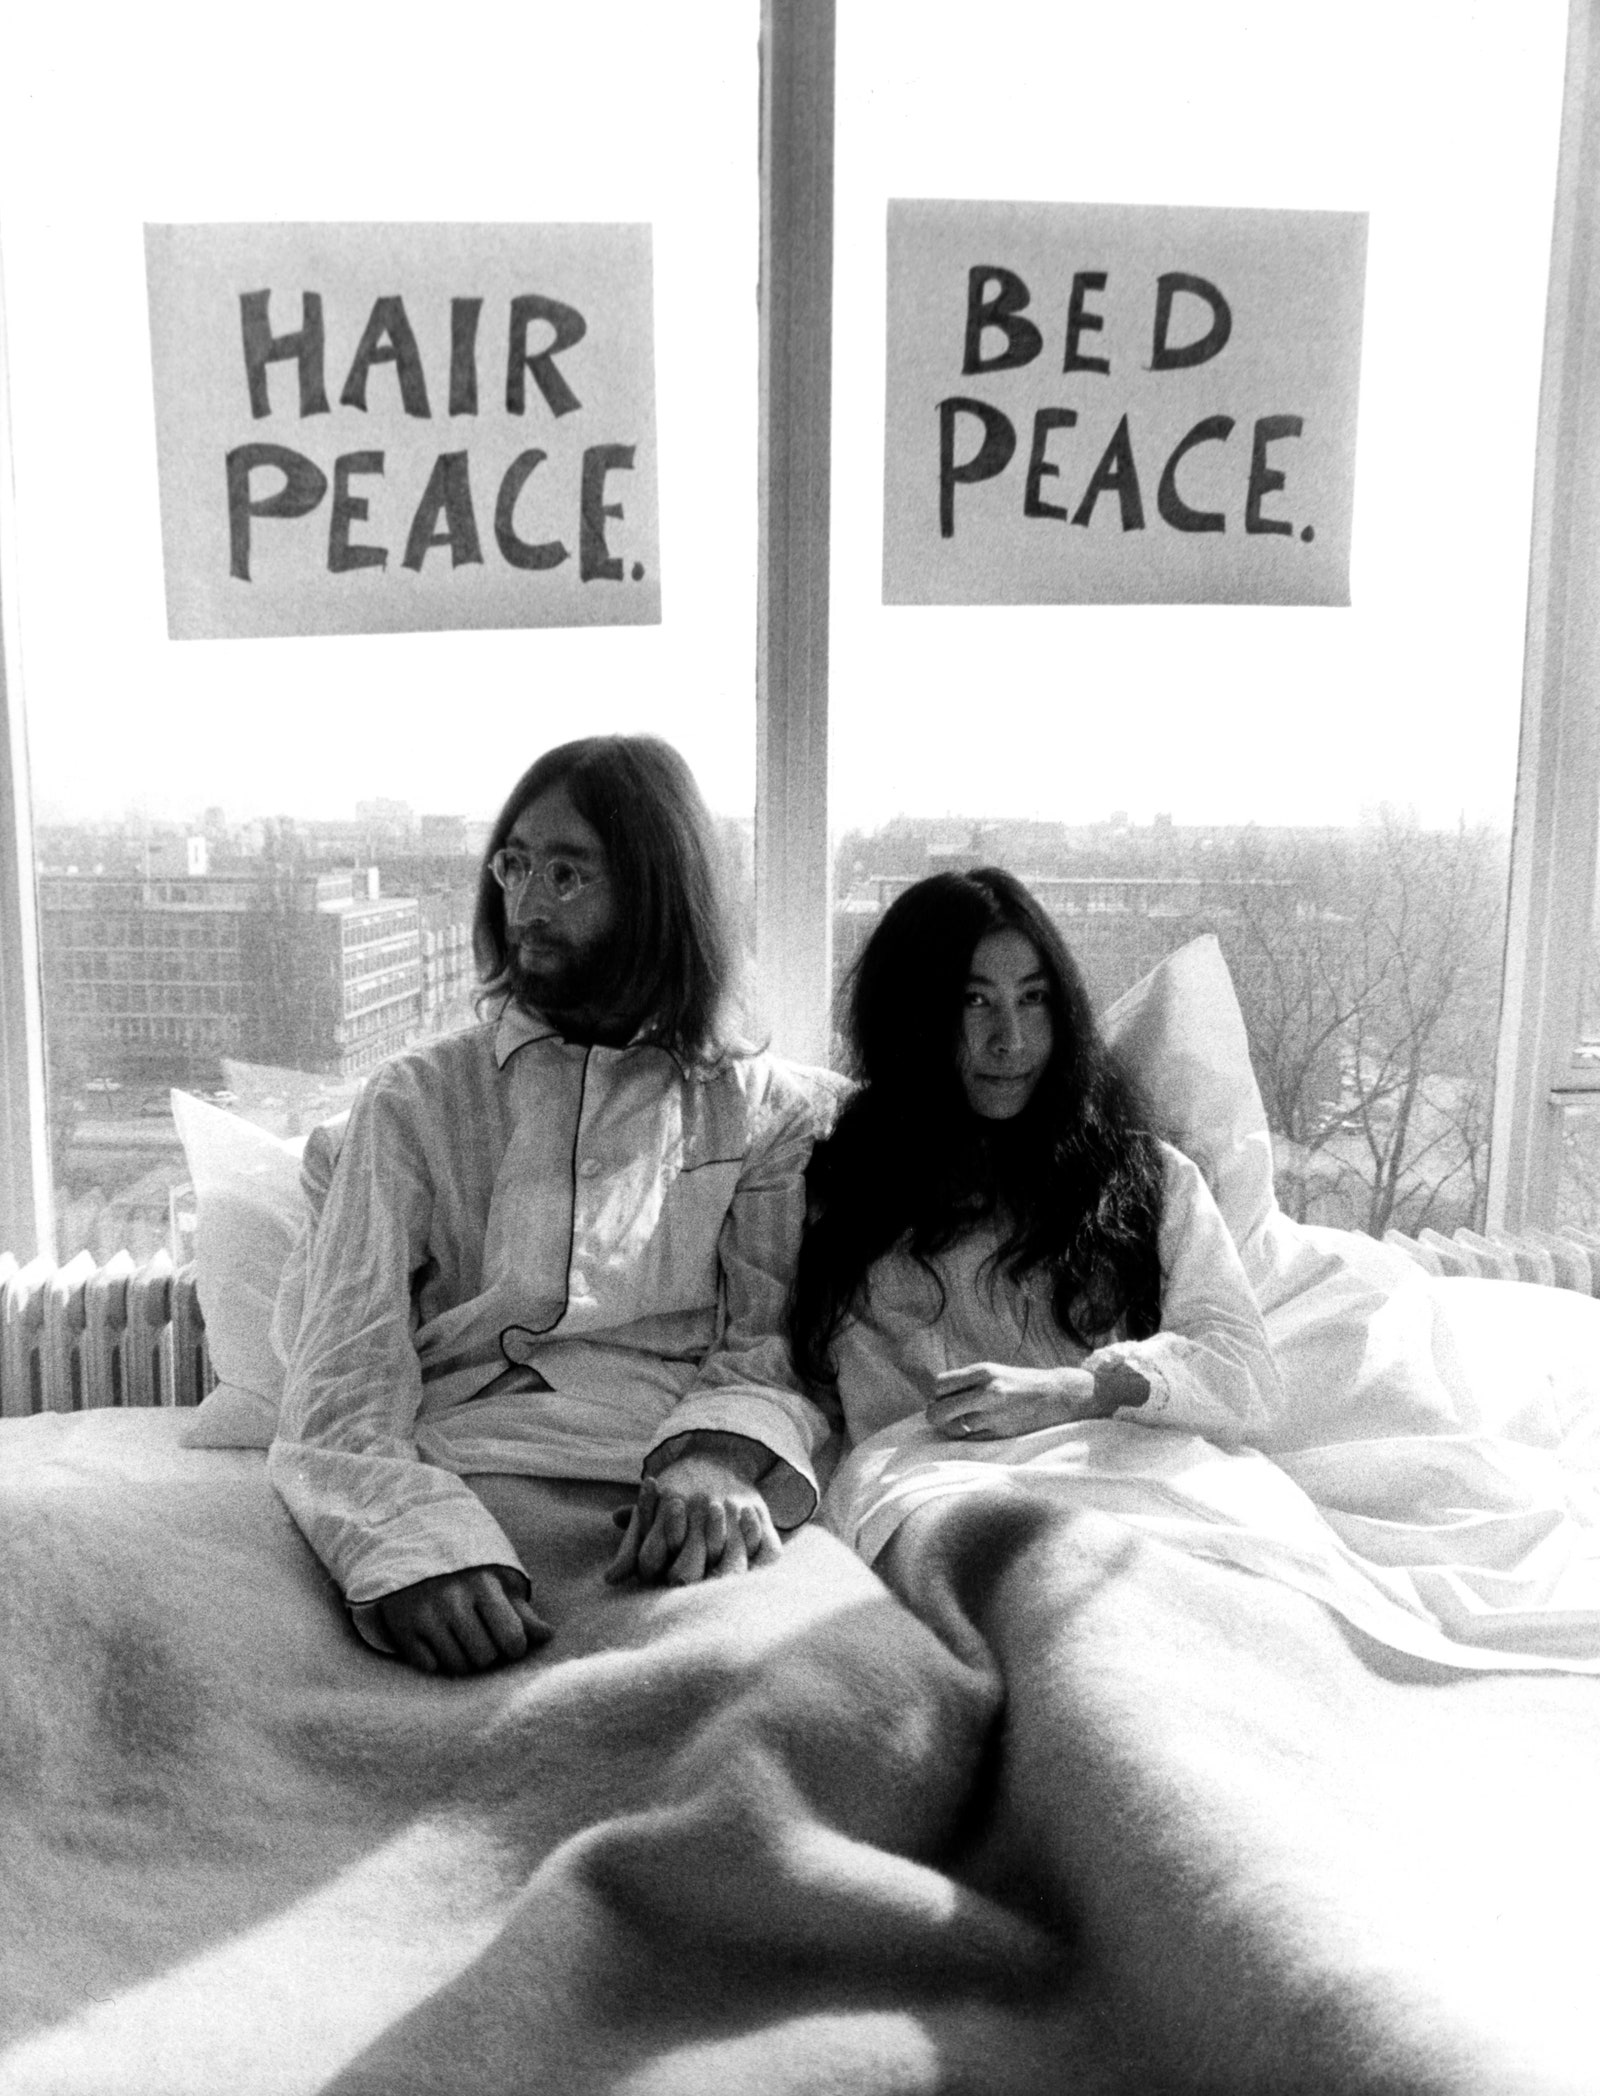 John Lennon and Yoko Ono: The story behind the legendary photo of the couple after their wedding